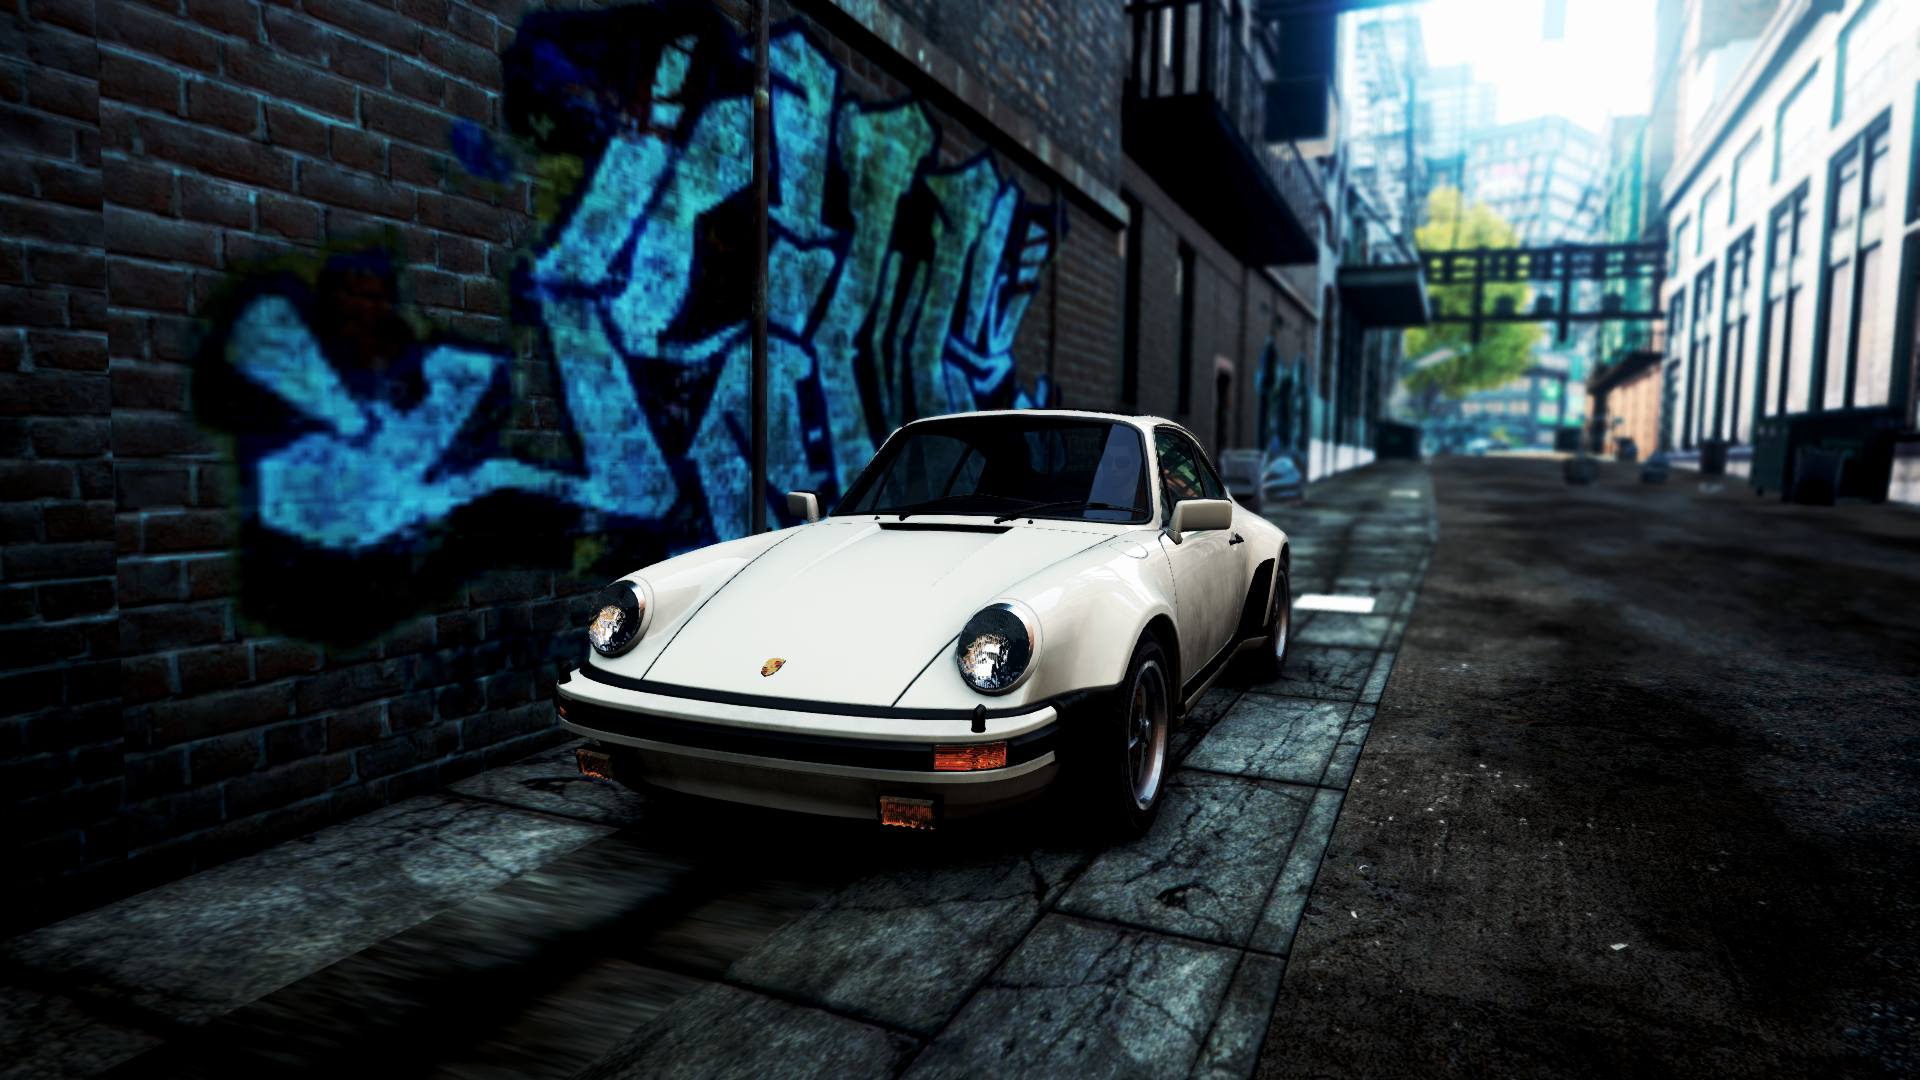 General 1920x1080 Need for Speed: Most Wanted video games car alleyway graffiti video game art screen shot frontal view headlights depth of field building vehicle sunlight road